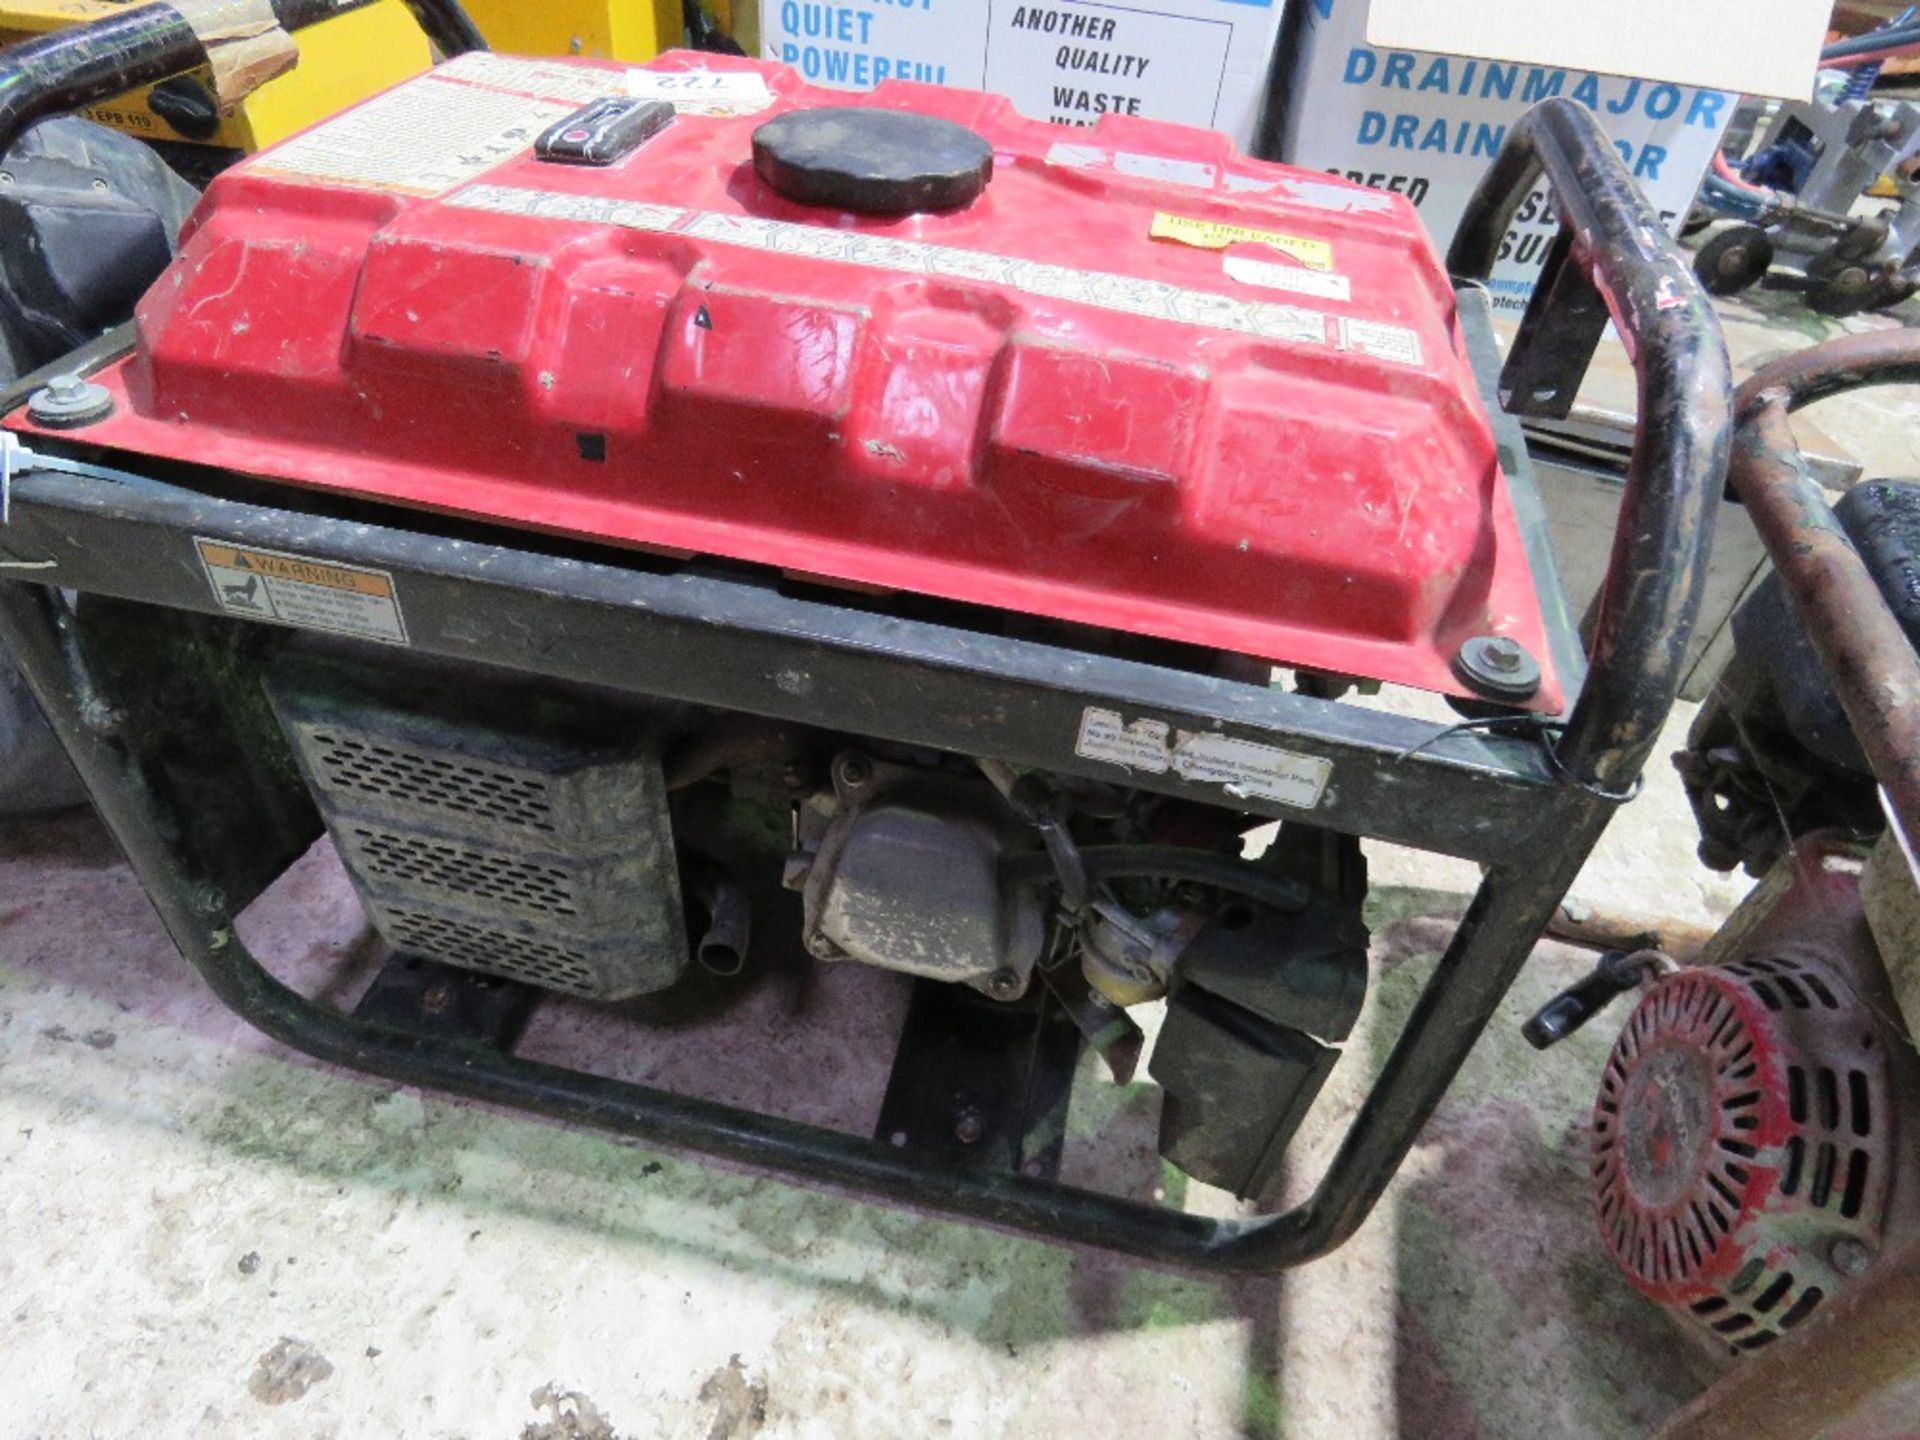 CPPG2.3 PETROL ENGINED GENERATOR. - Image 3 of 3